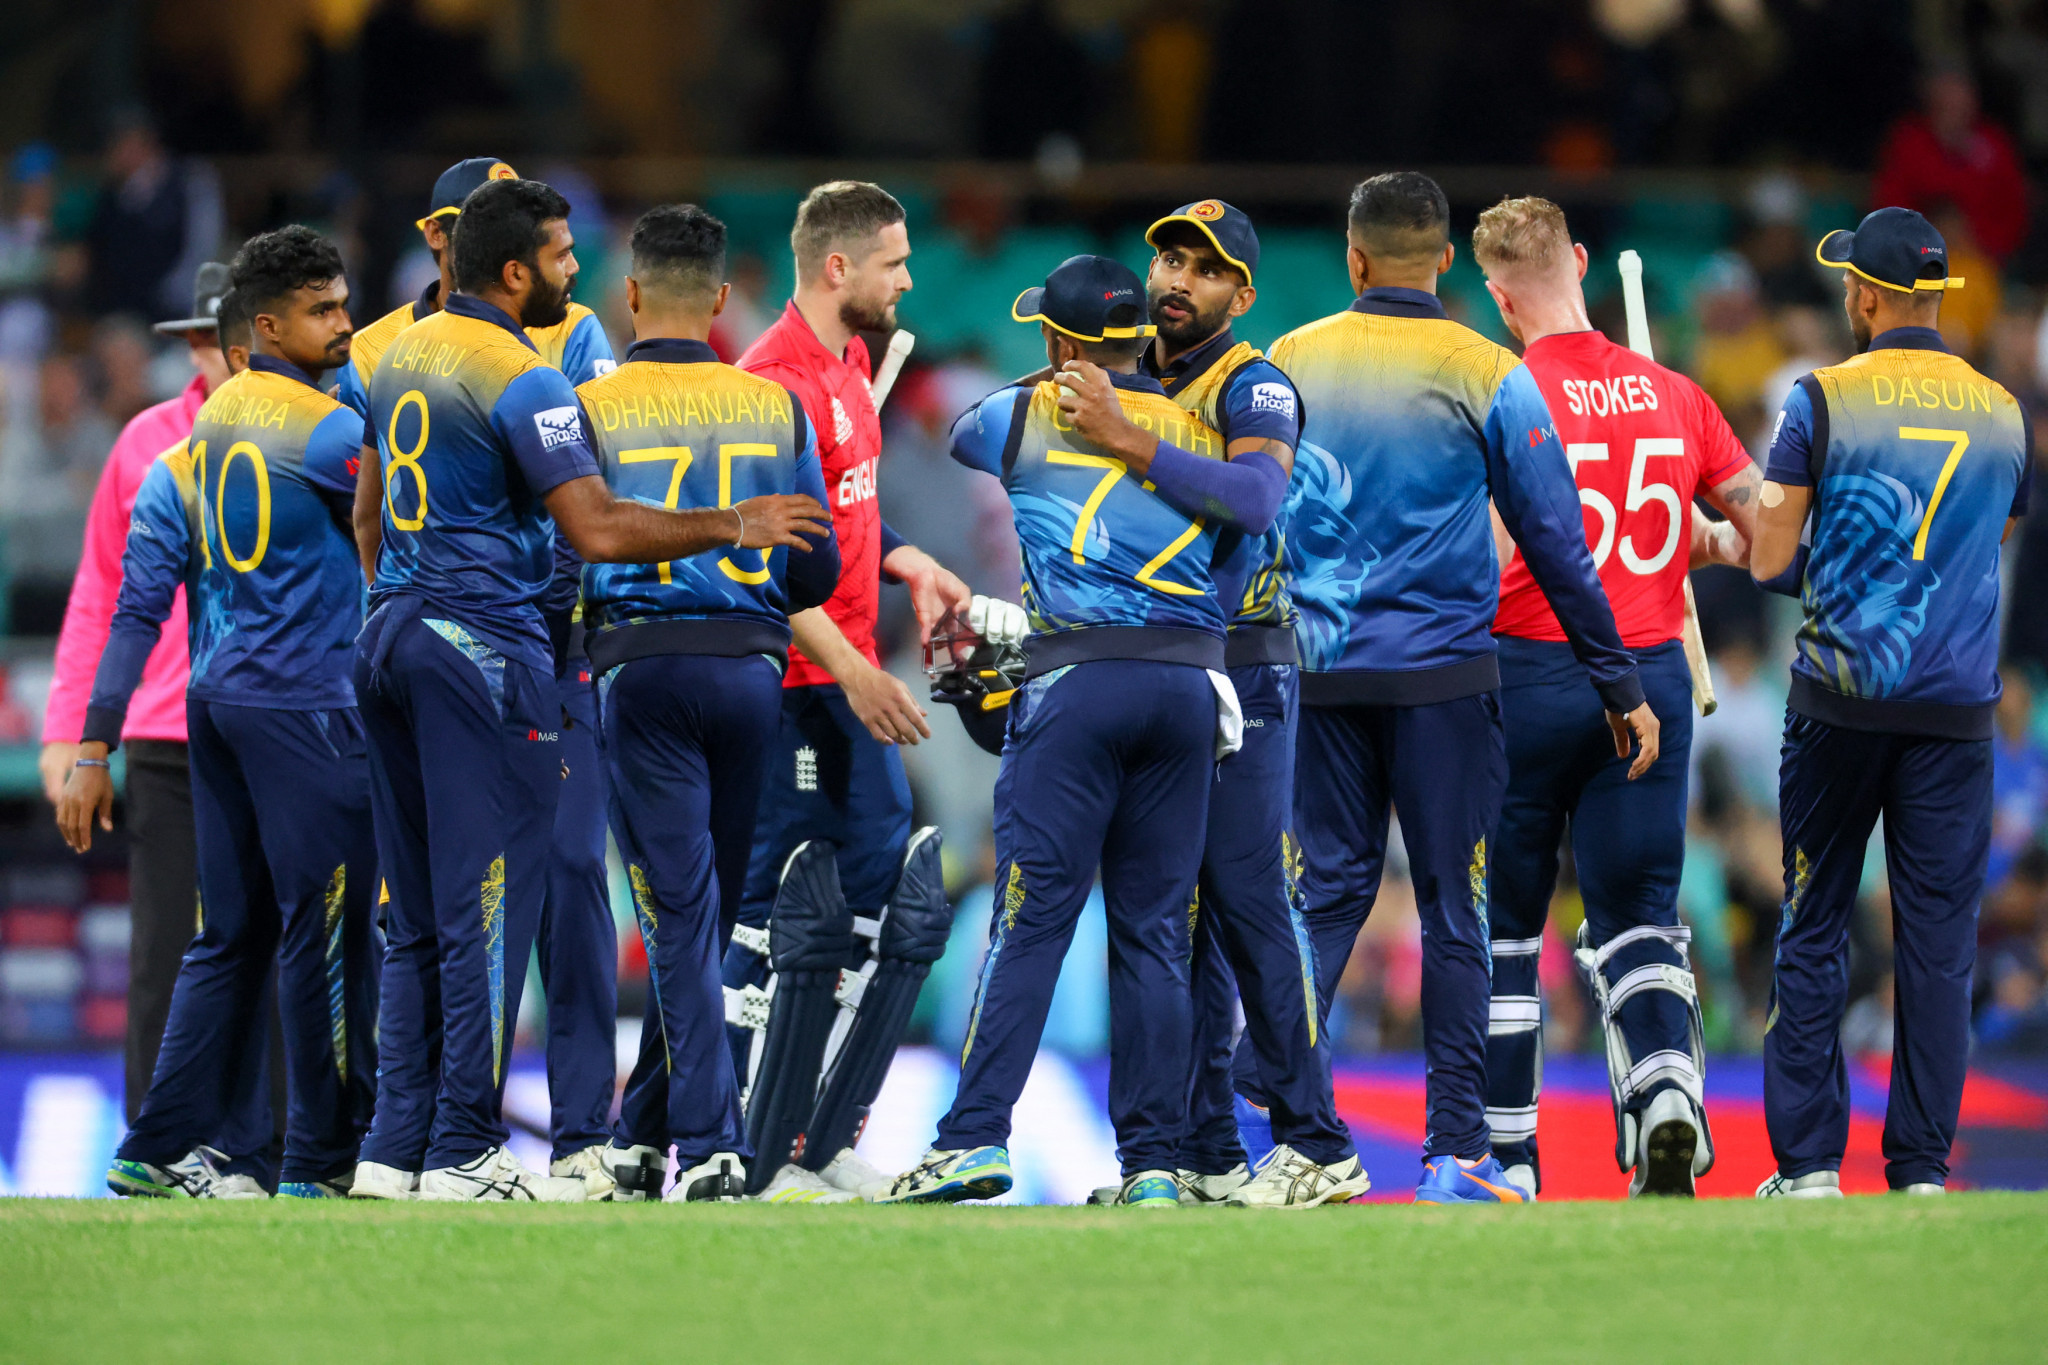 Sri Lanka's World Cup campaign came to an end yesterday ©Getty Images